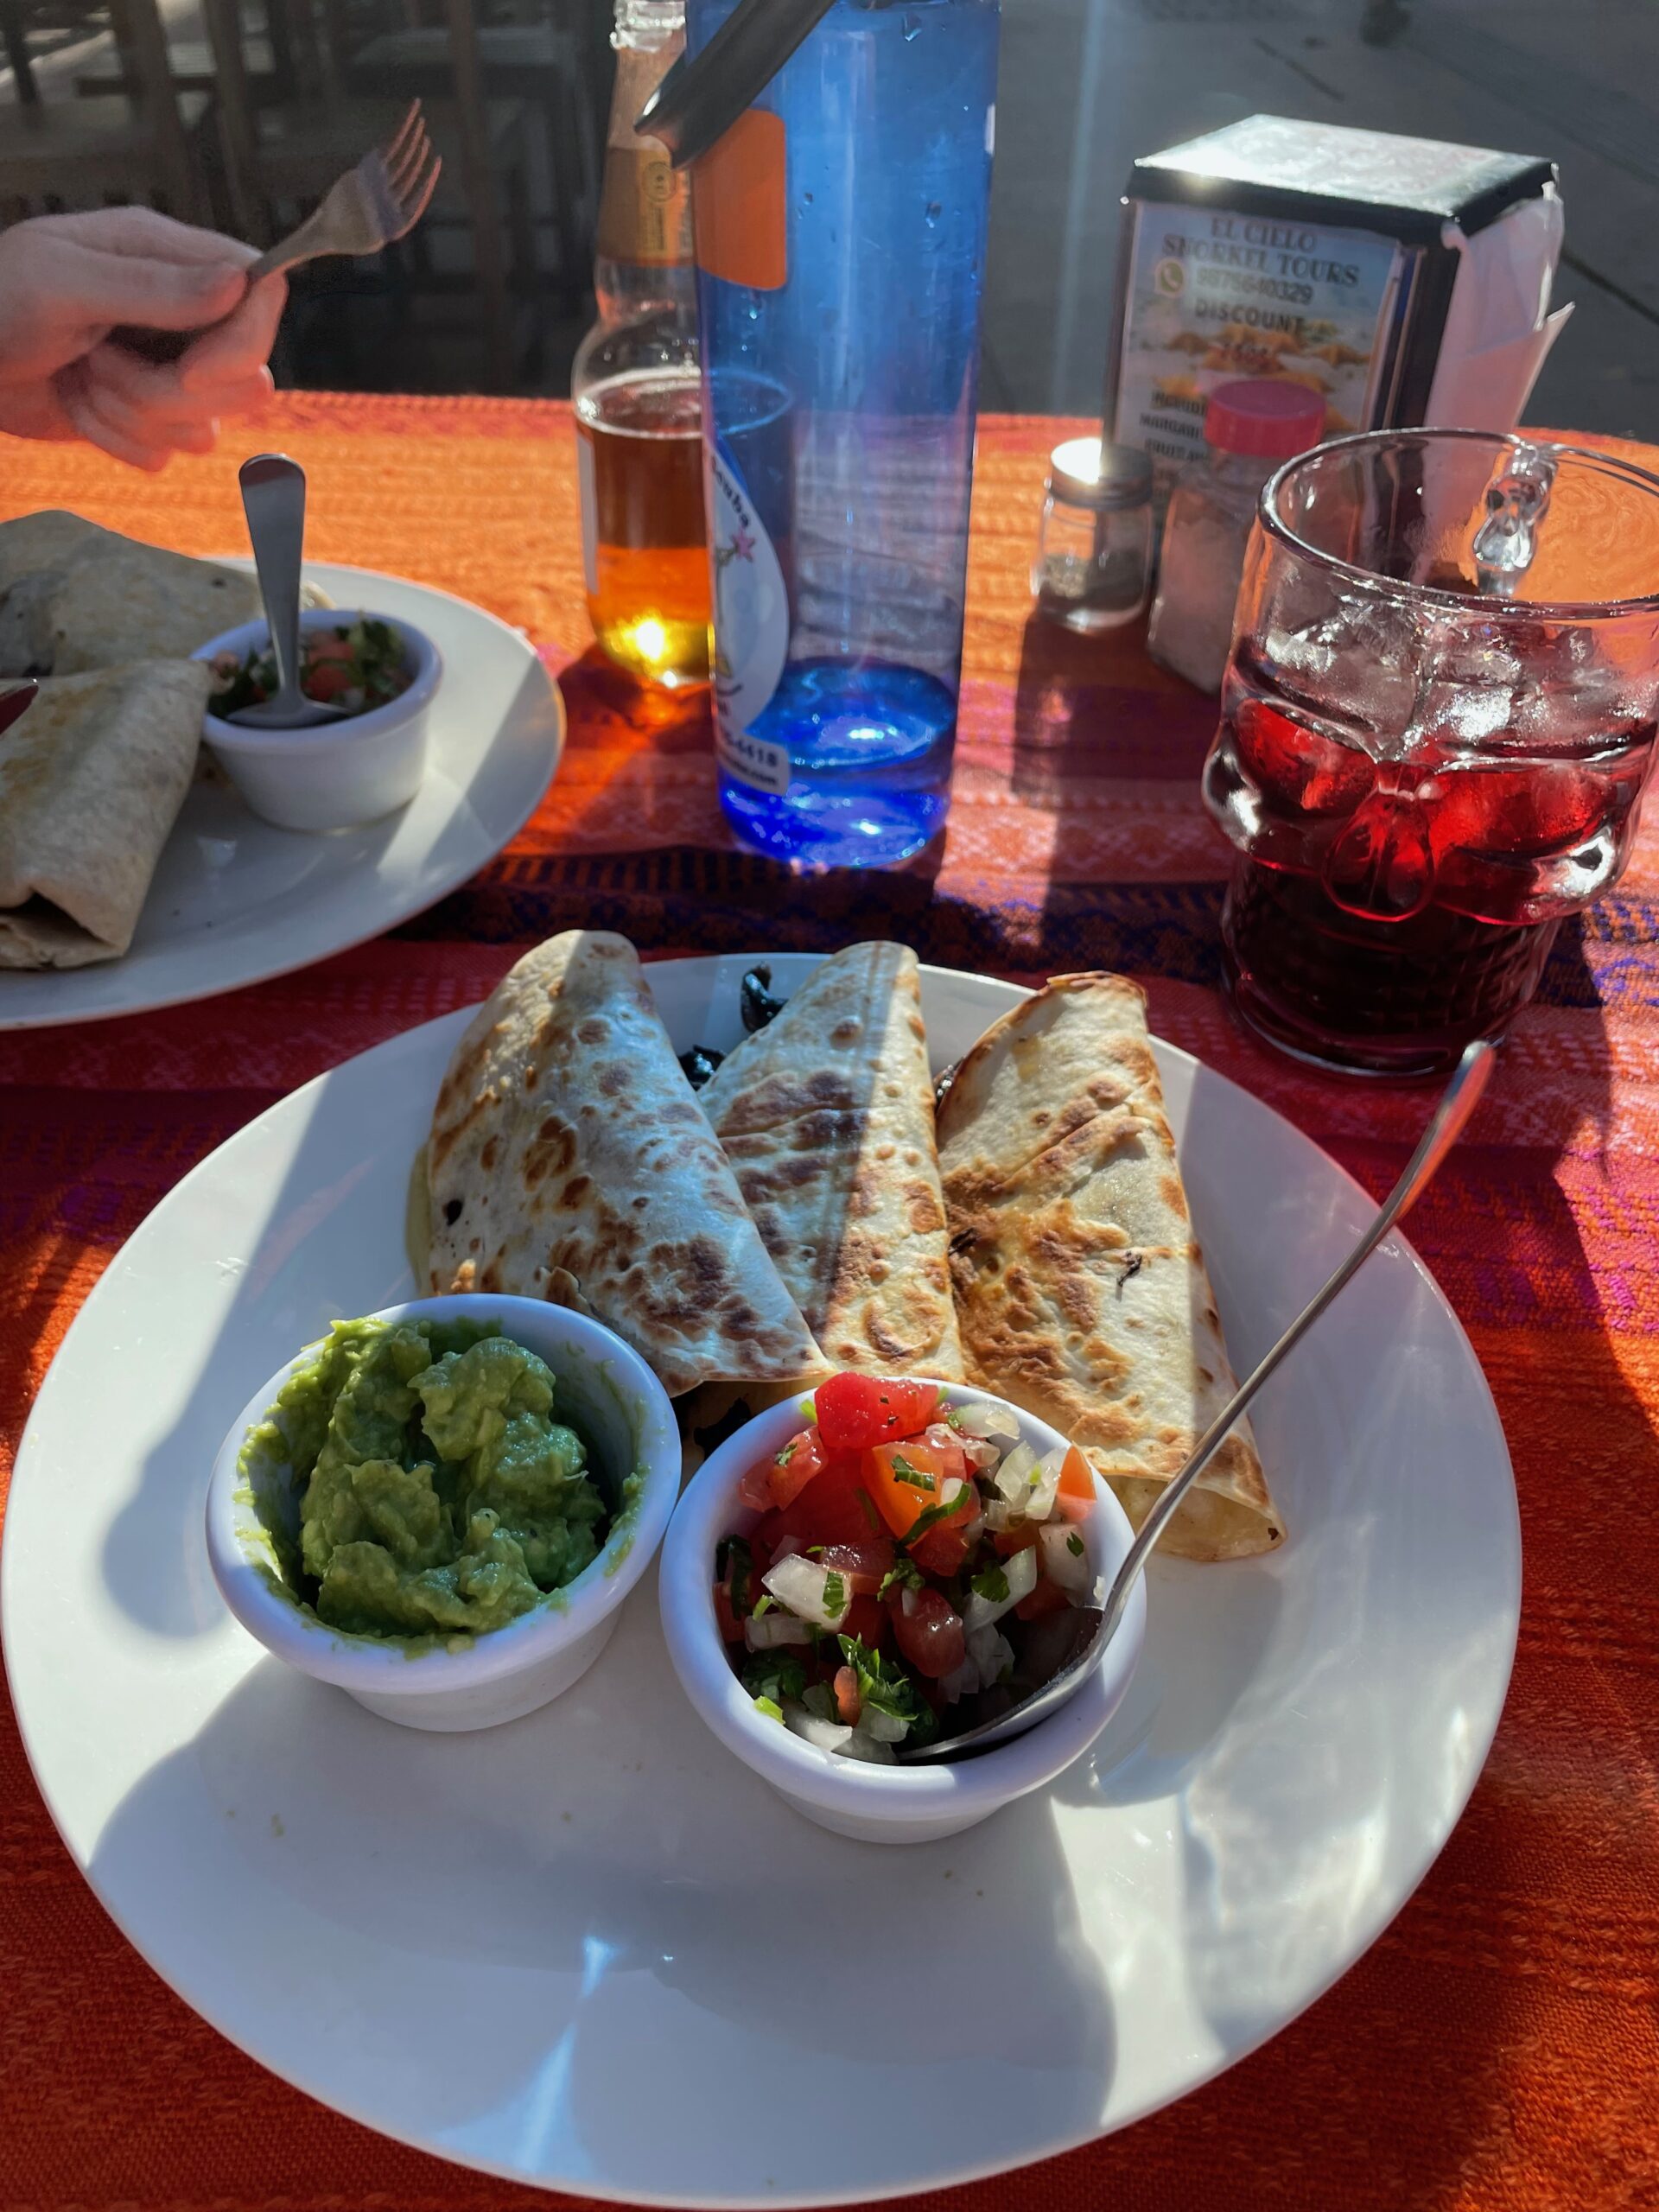 The food options in Cozumel